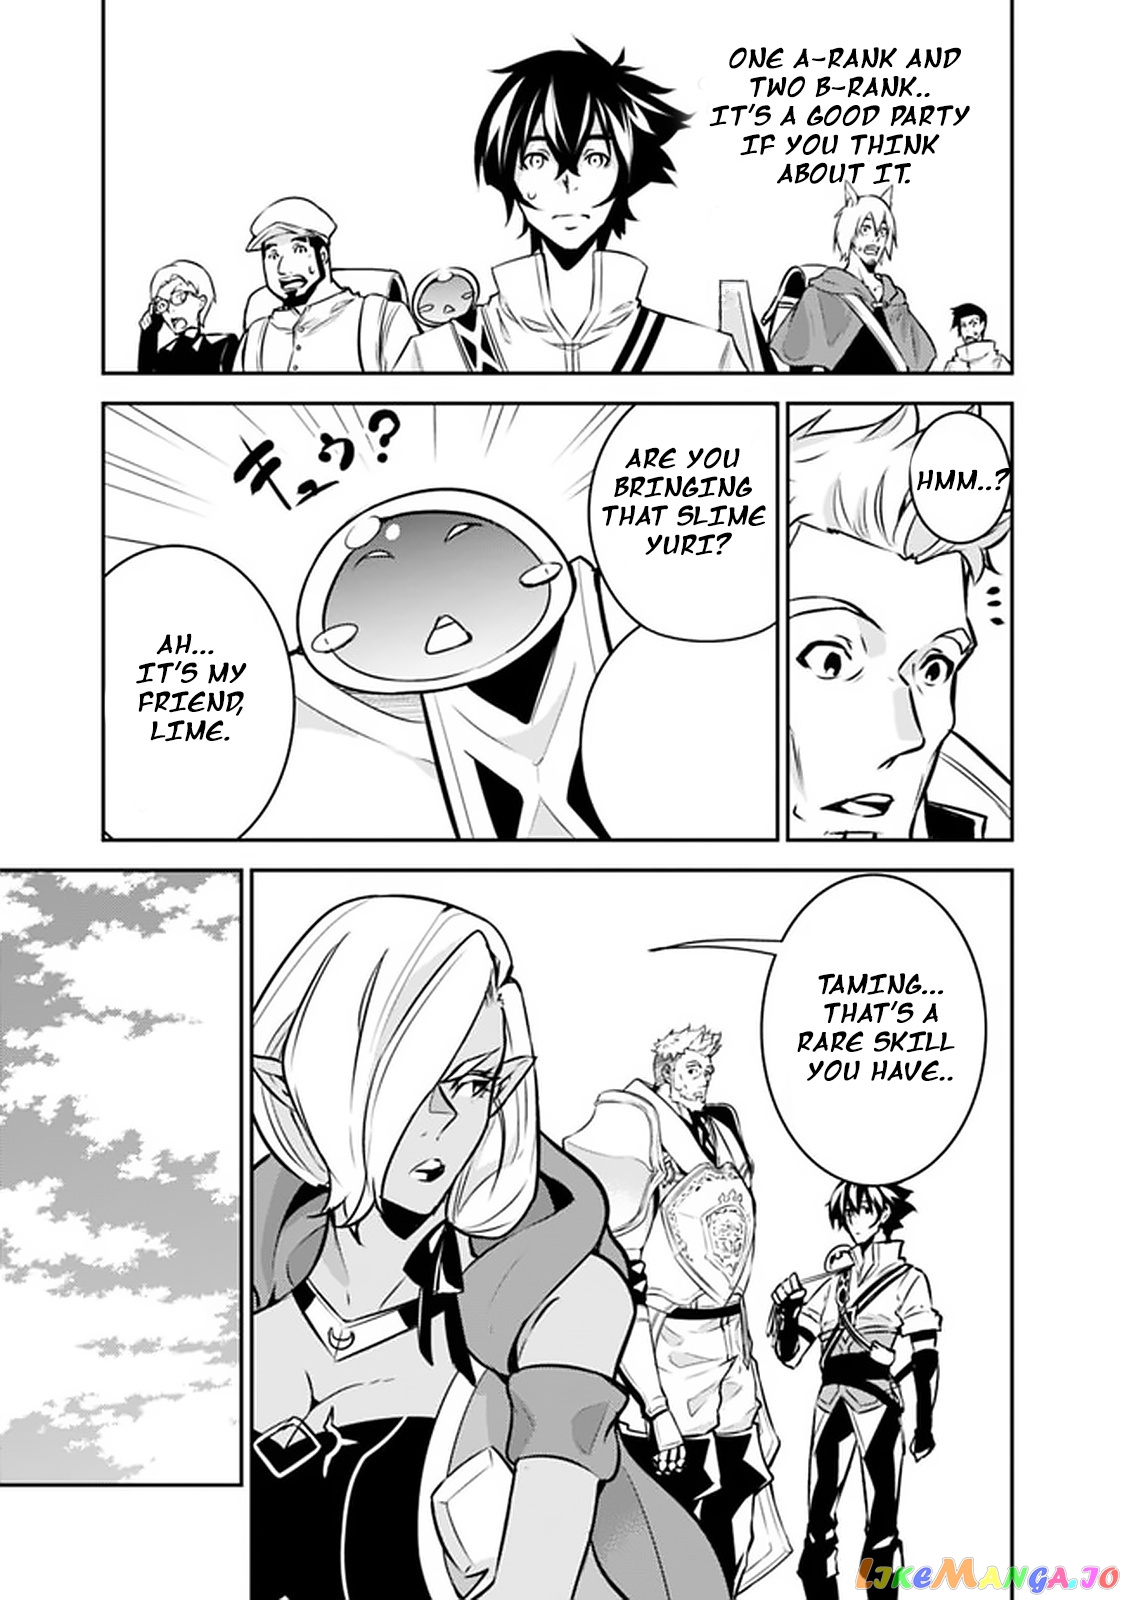 The Strongest Magical Swordsman Ever Reborn As An F-Rank Adventurer. chapter 32 - page 3